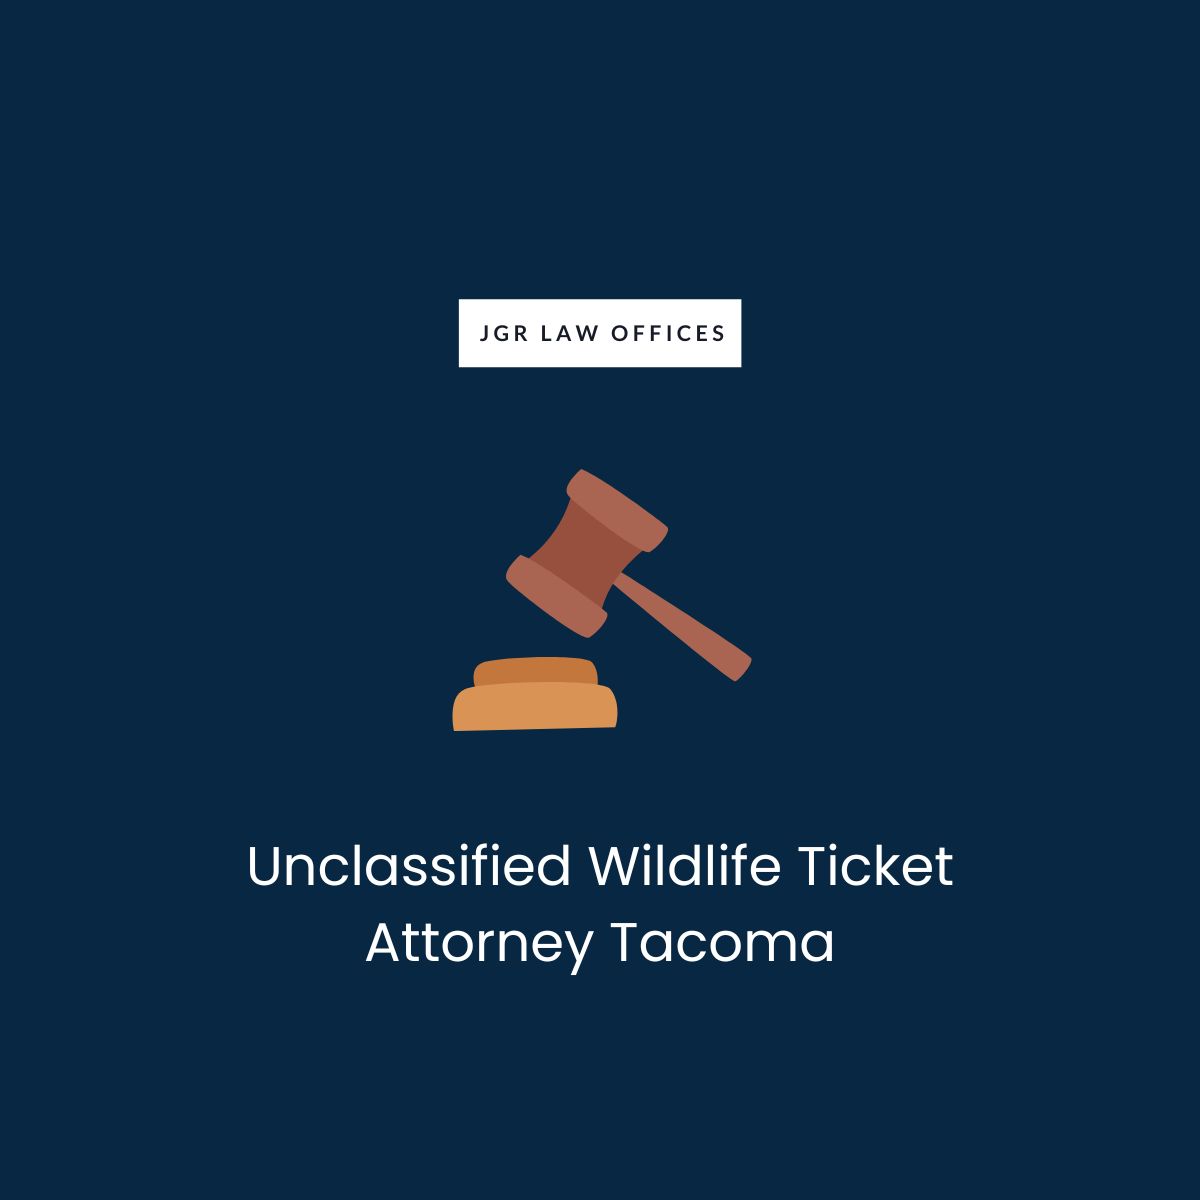 Unclassified Wildlife Ticket Attorney Tacoma